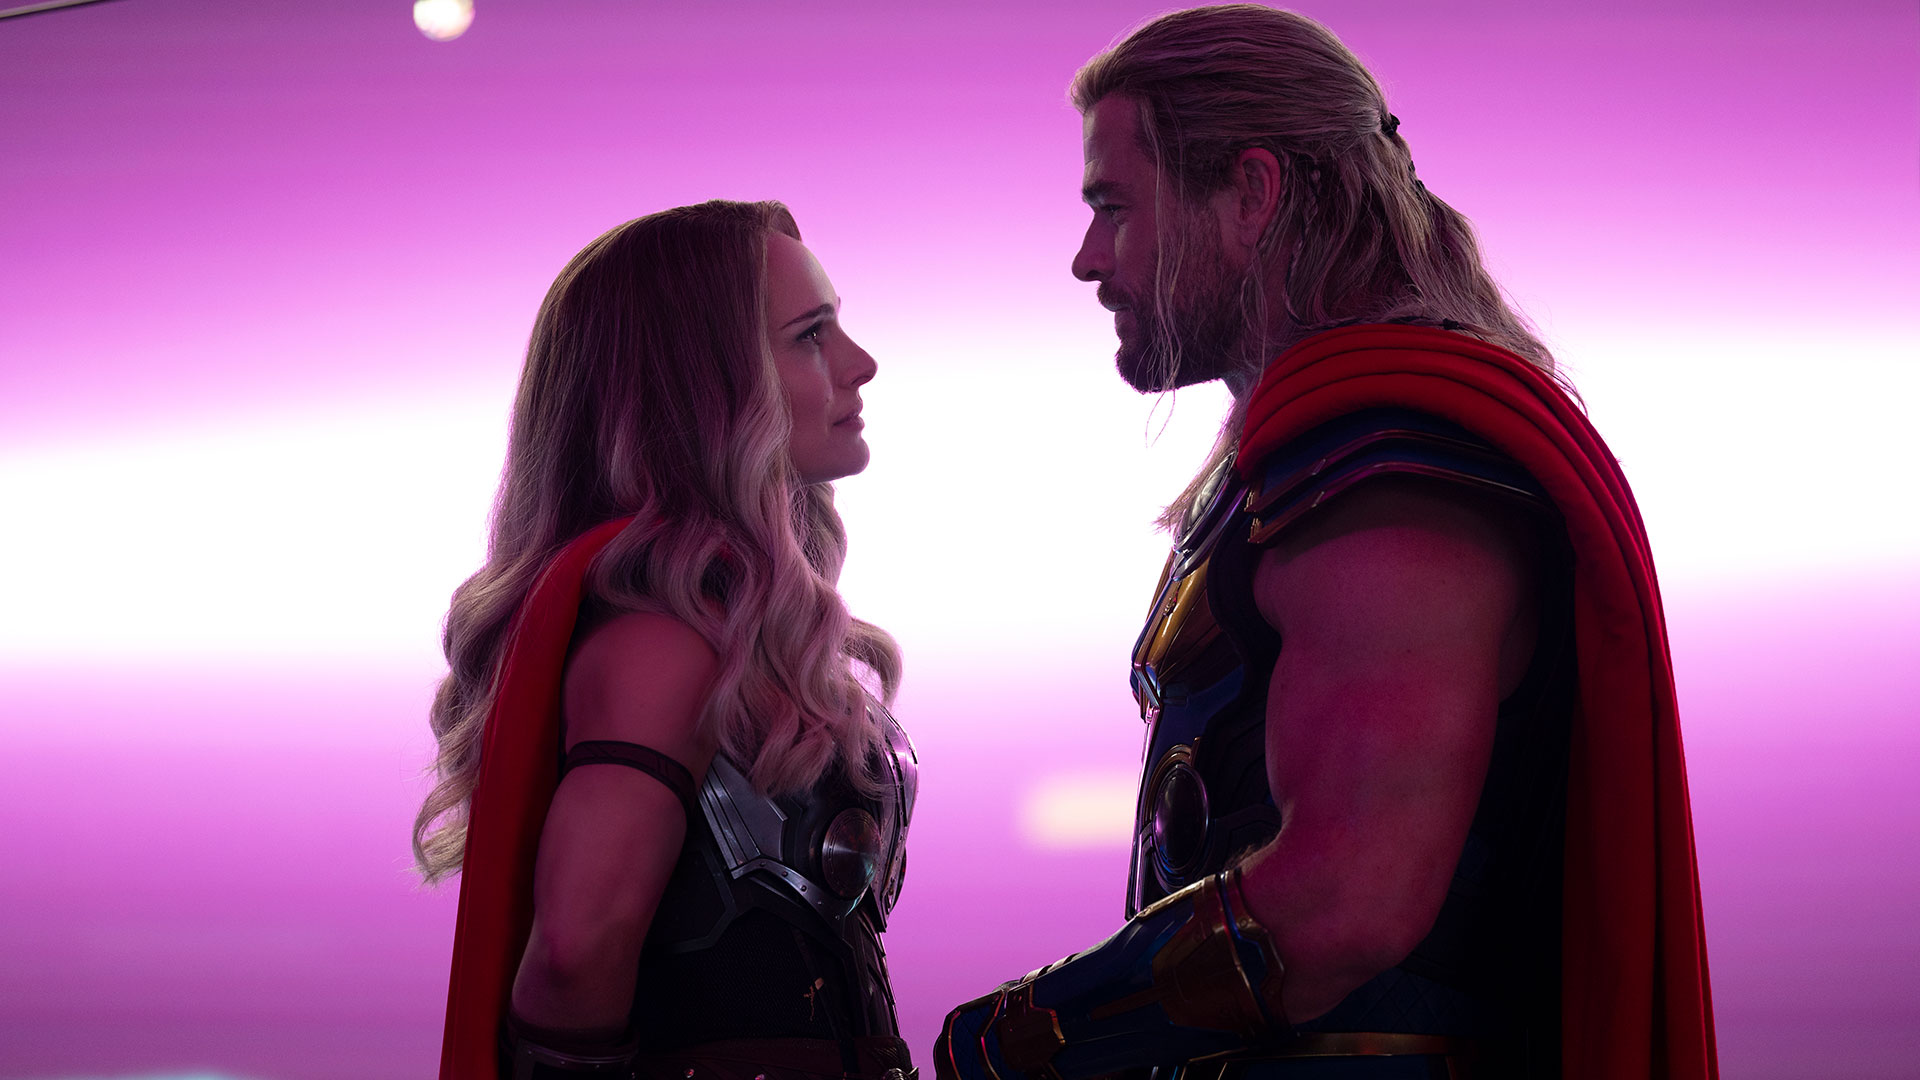 Thor, Jane and the Guardians rock up in these exclusive Love and Thunder images | GamesRadar+